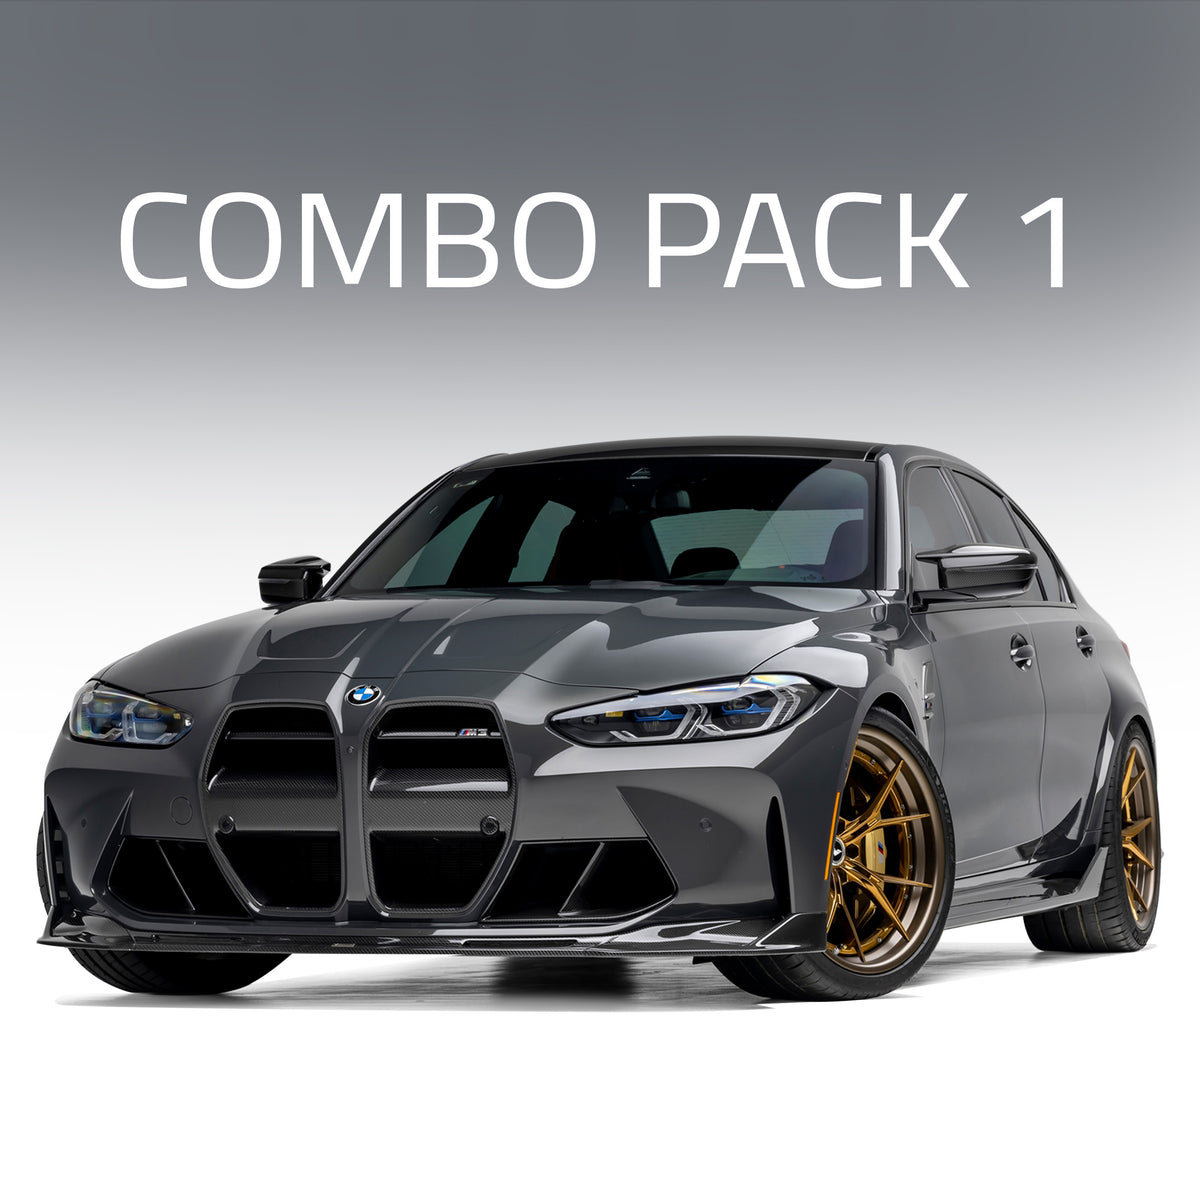 BMW G8X M3 Combo 1:  Front Spoiler, Front Grille, Decklid Spoiler & Rear Diffuser - Vorsteiner Wheels  - Aero - [tags]